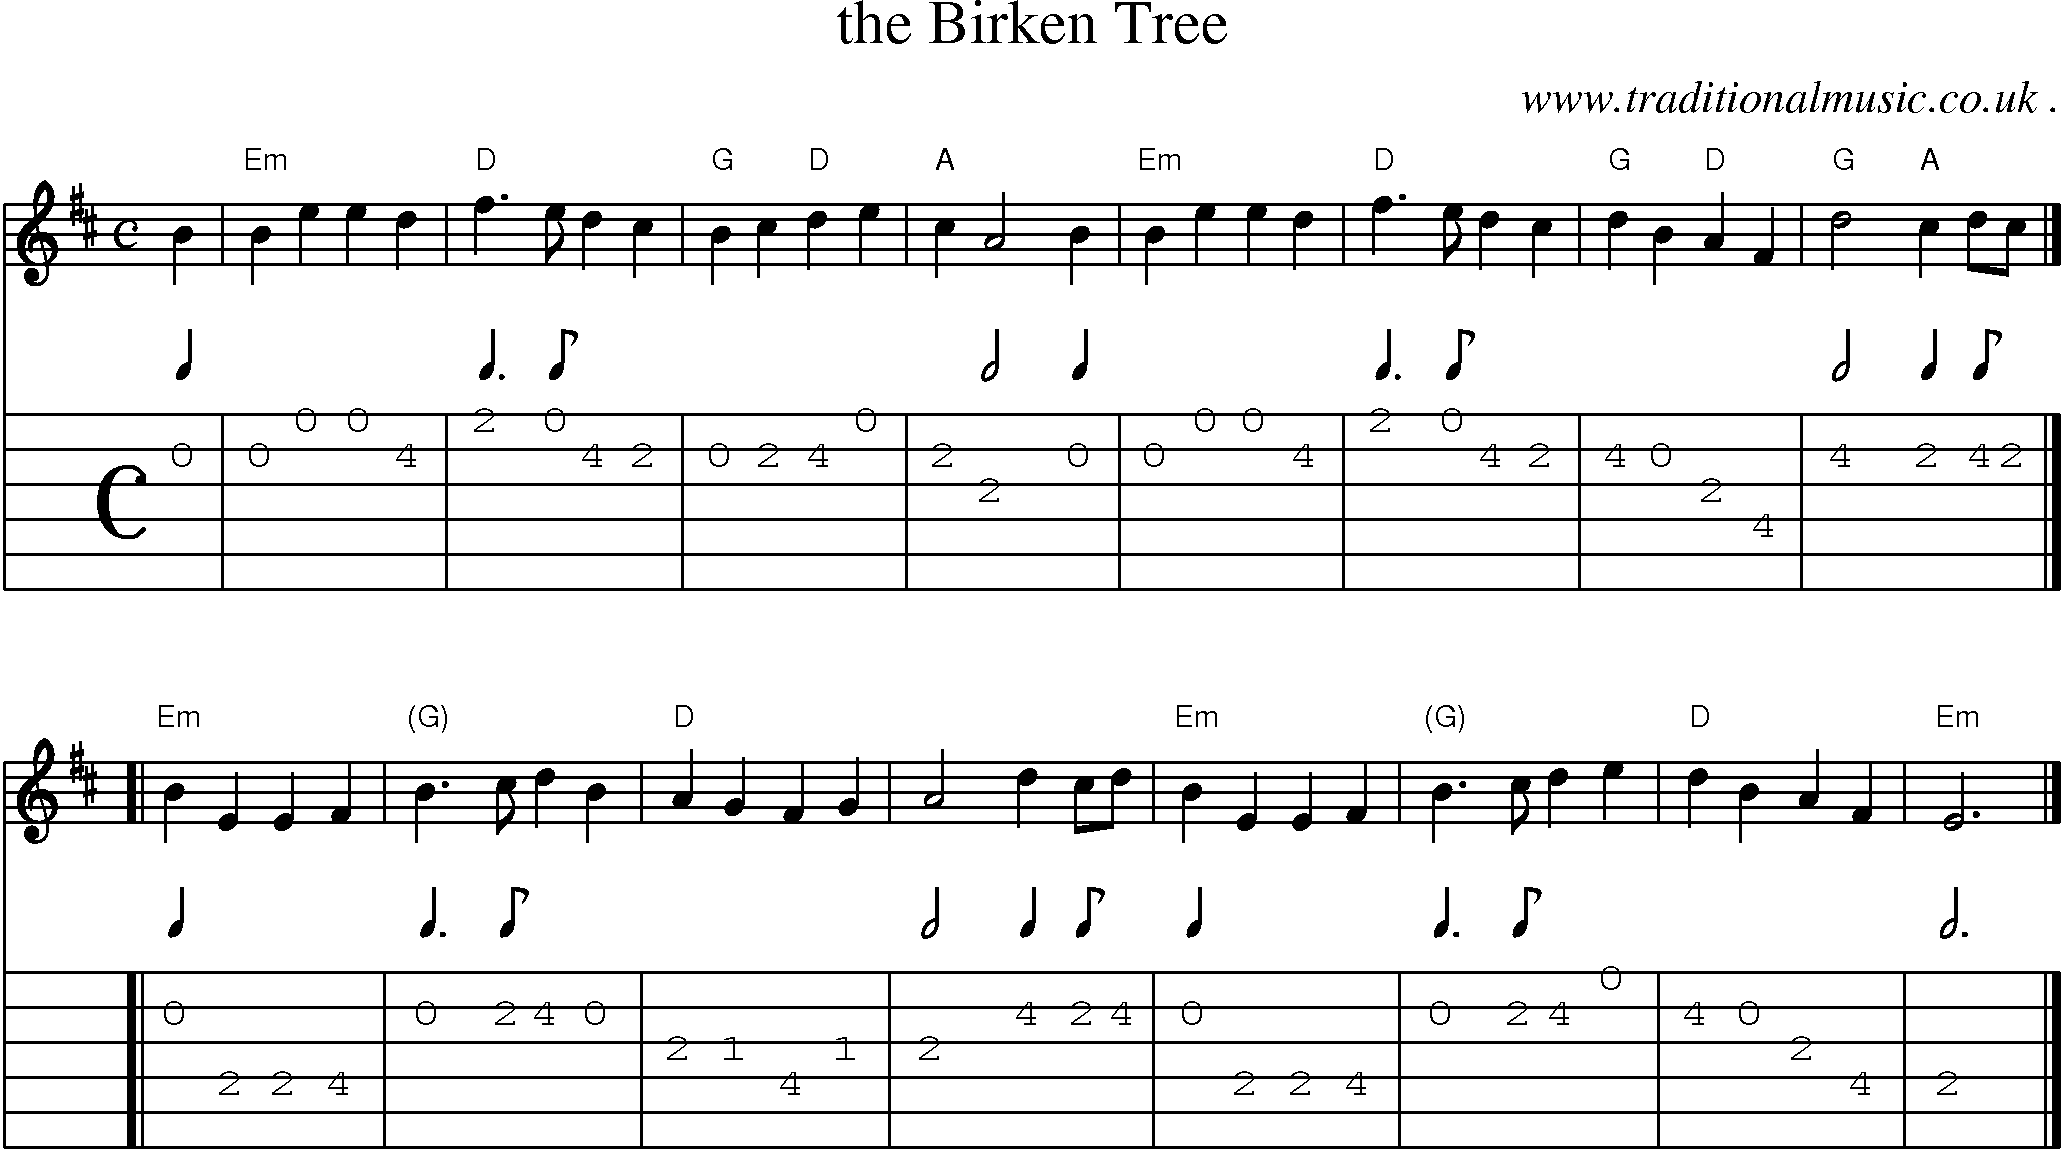 Sheet-music  score, Chords and Guitar Tabs for The Birken Tree